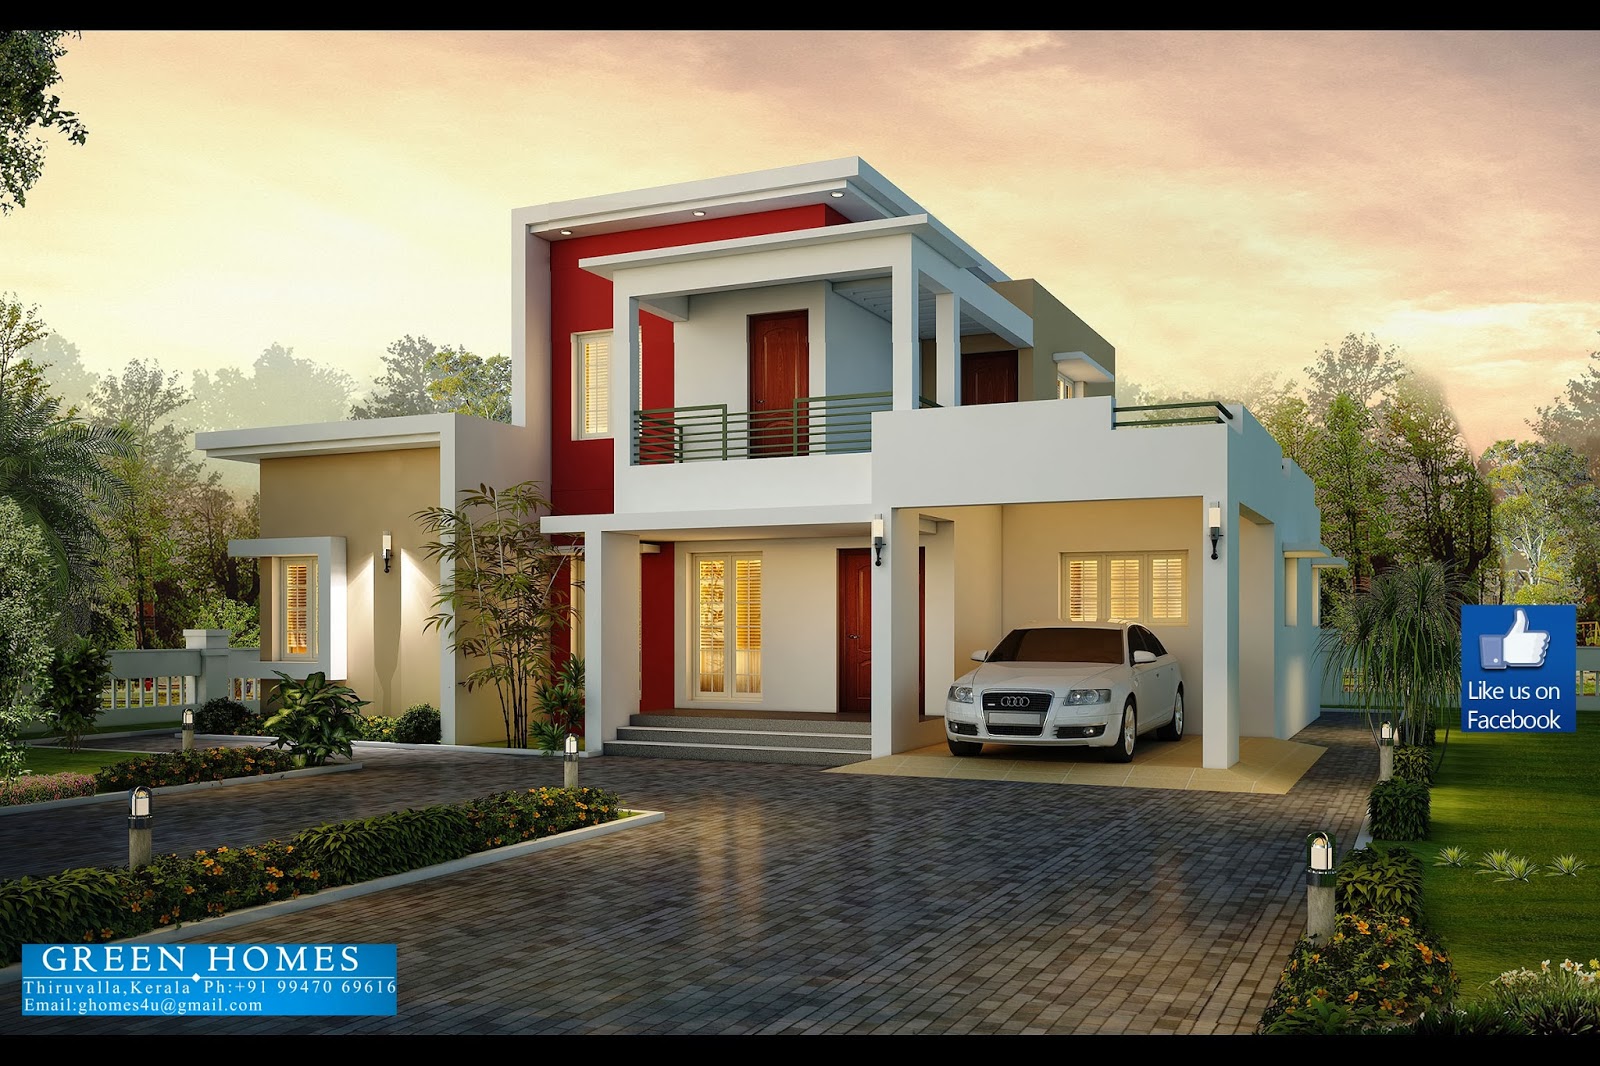 Green Homes: Awesome 3 Bedroom Modern House Design